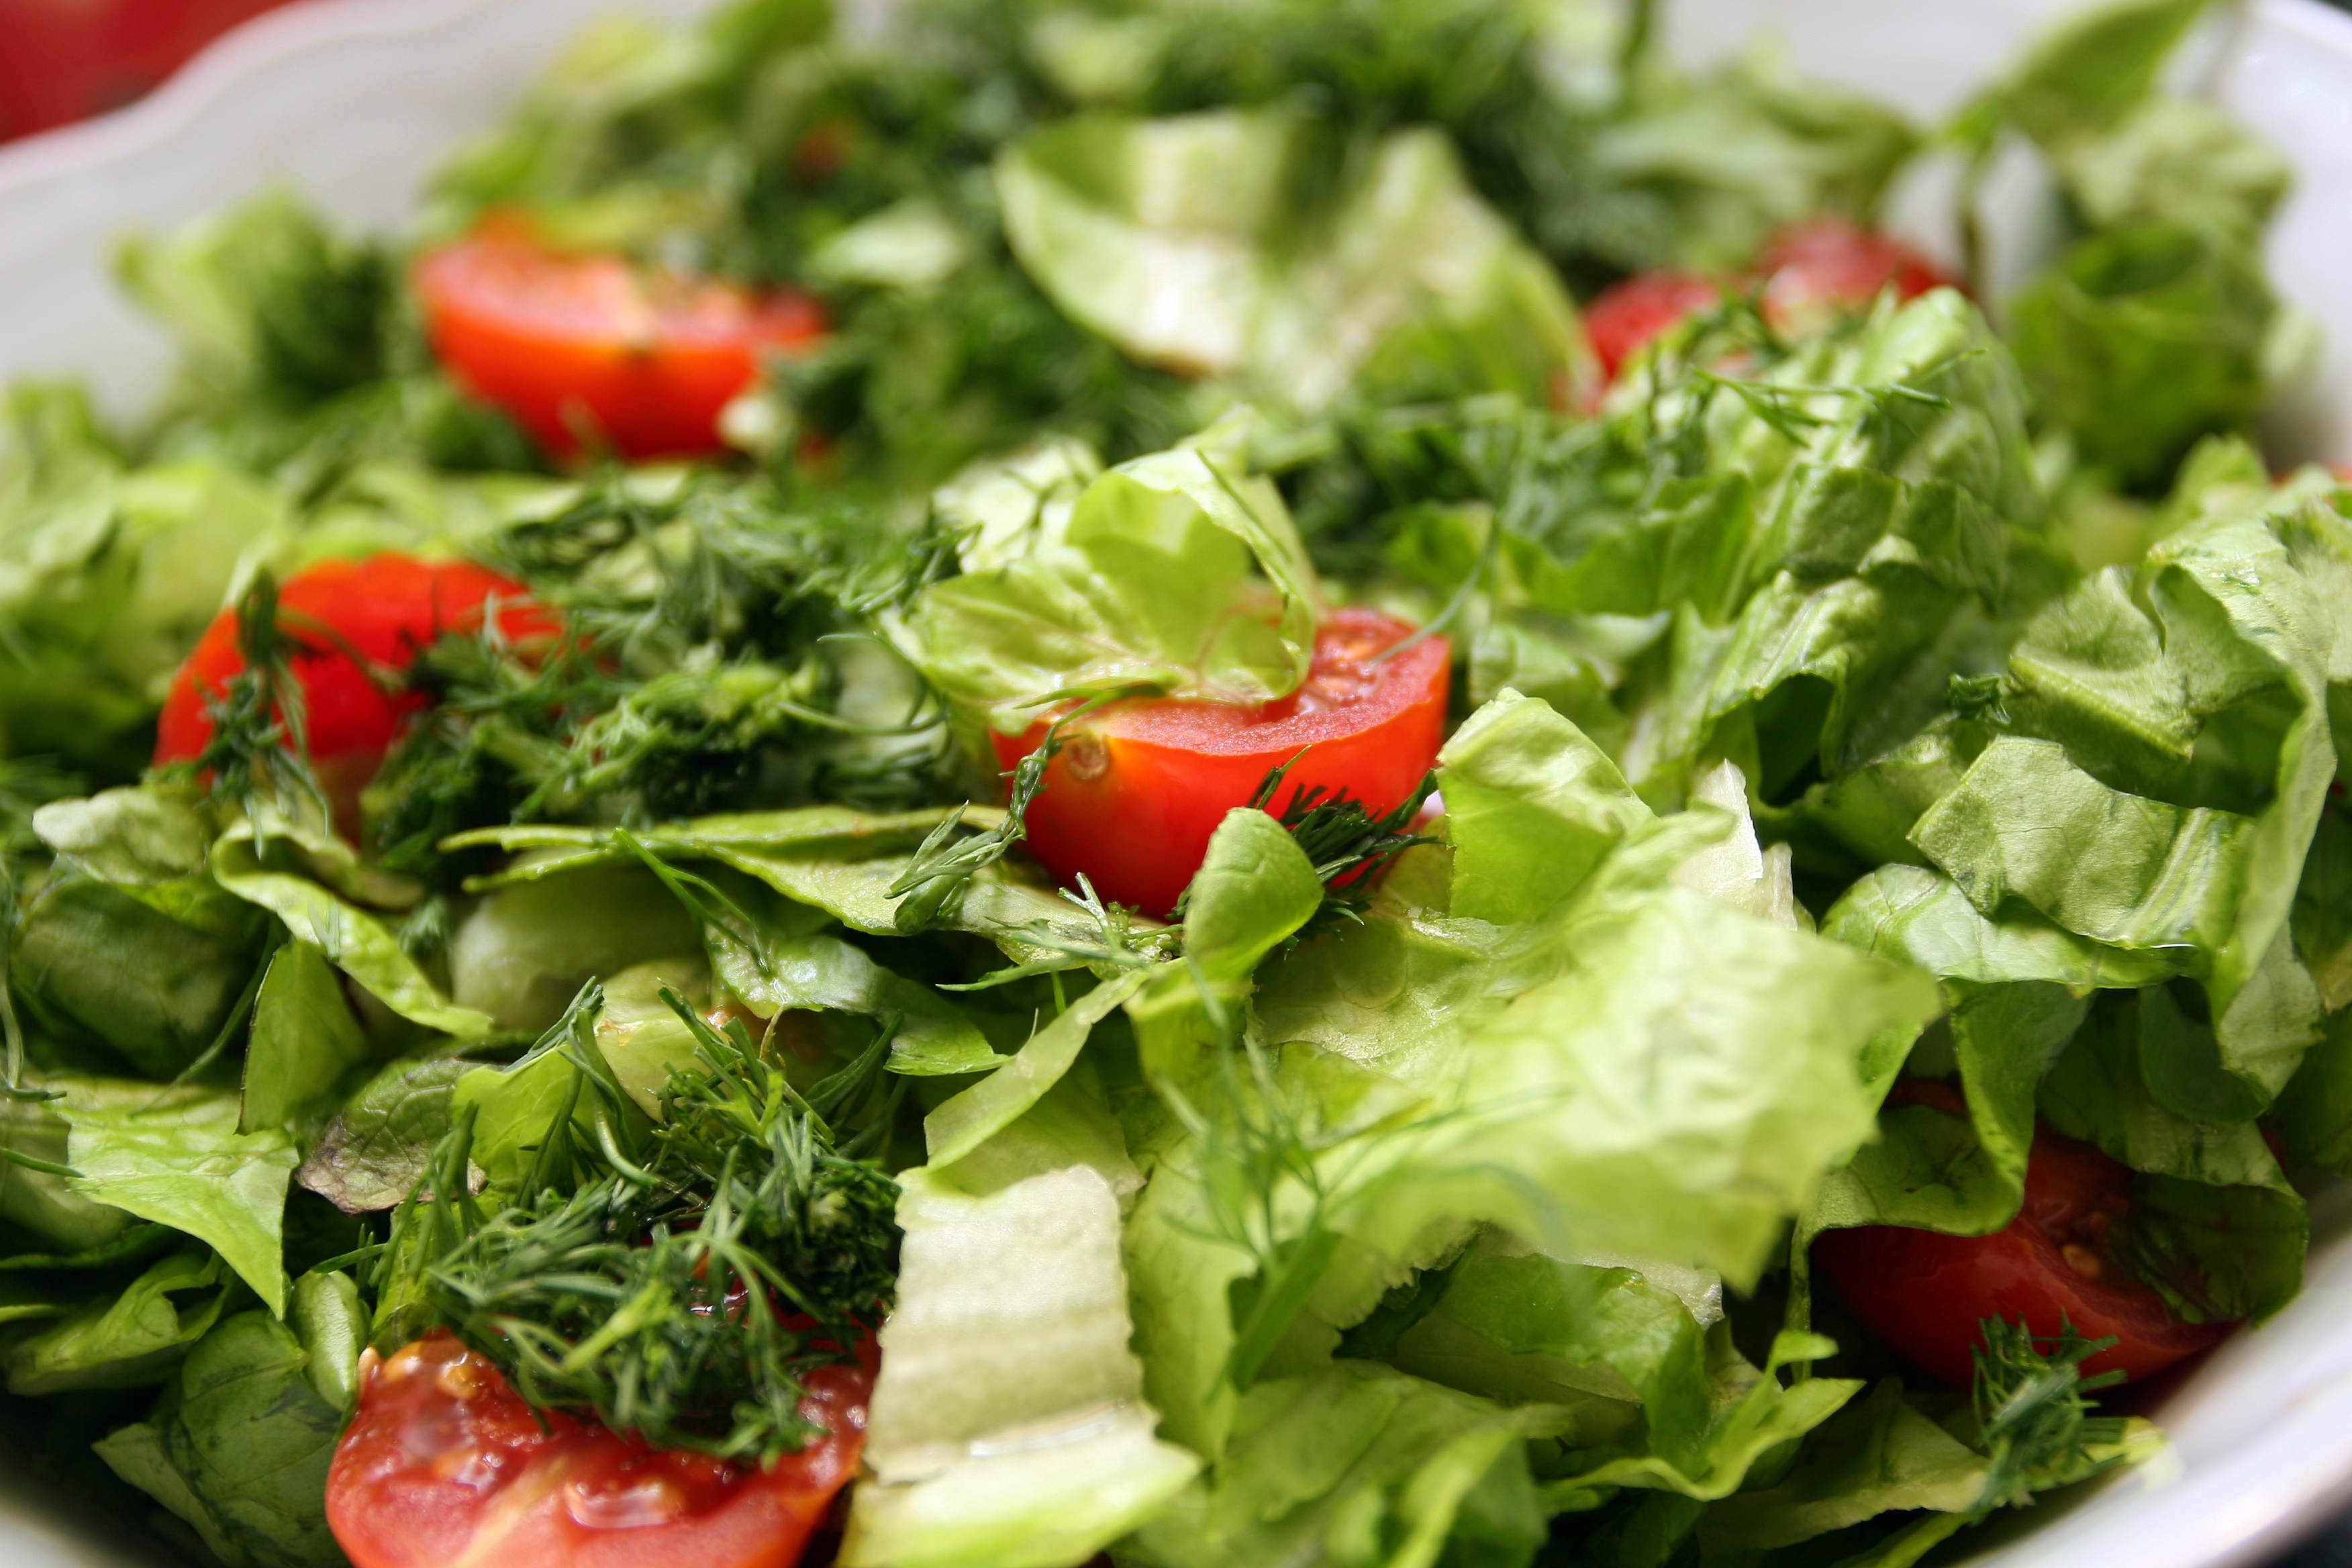 Delicious salad with greens and tomatoes